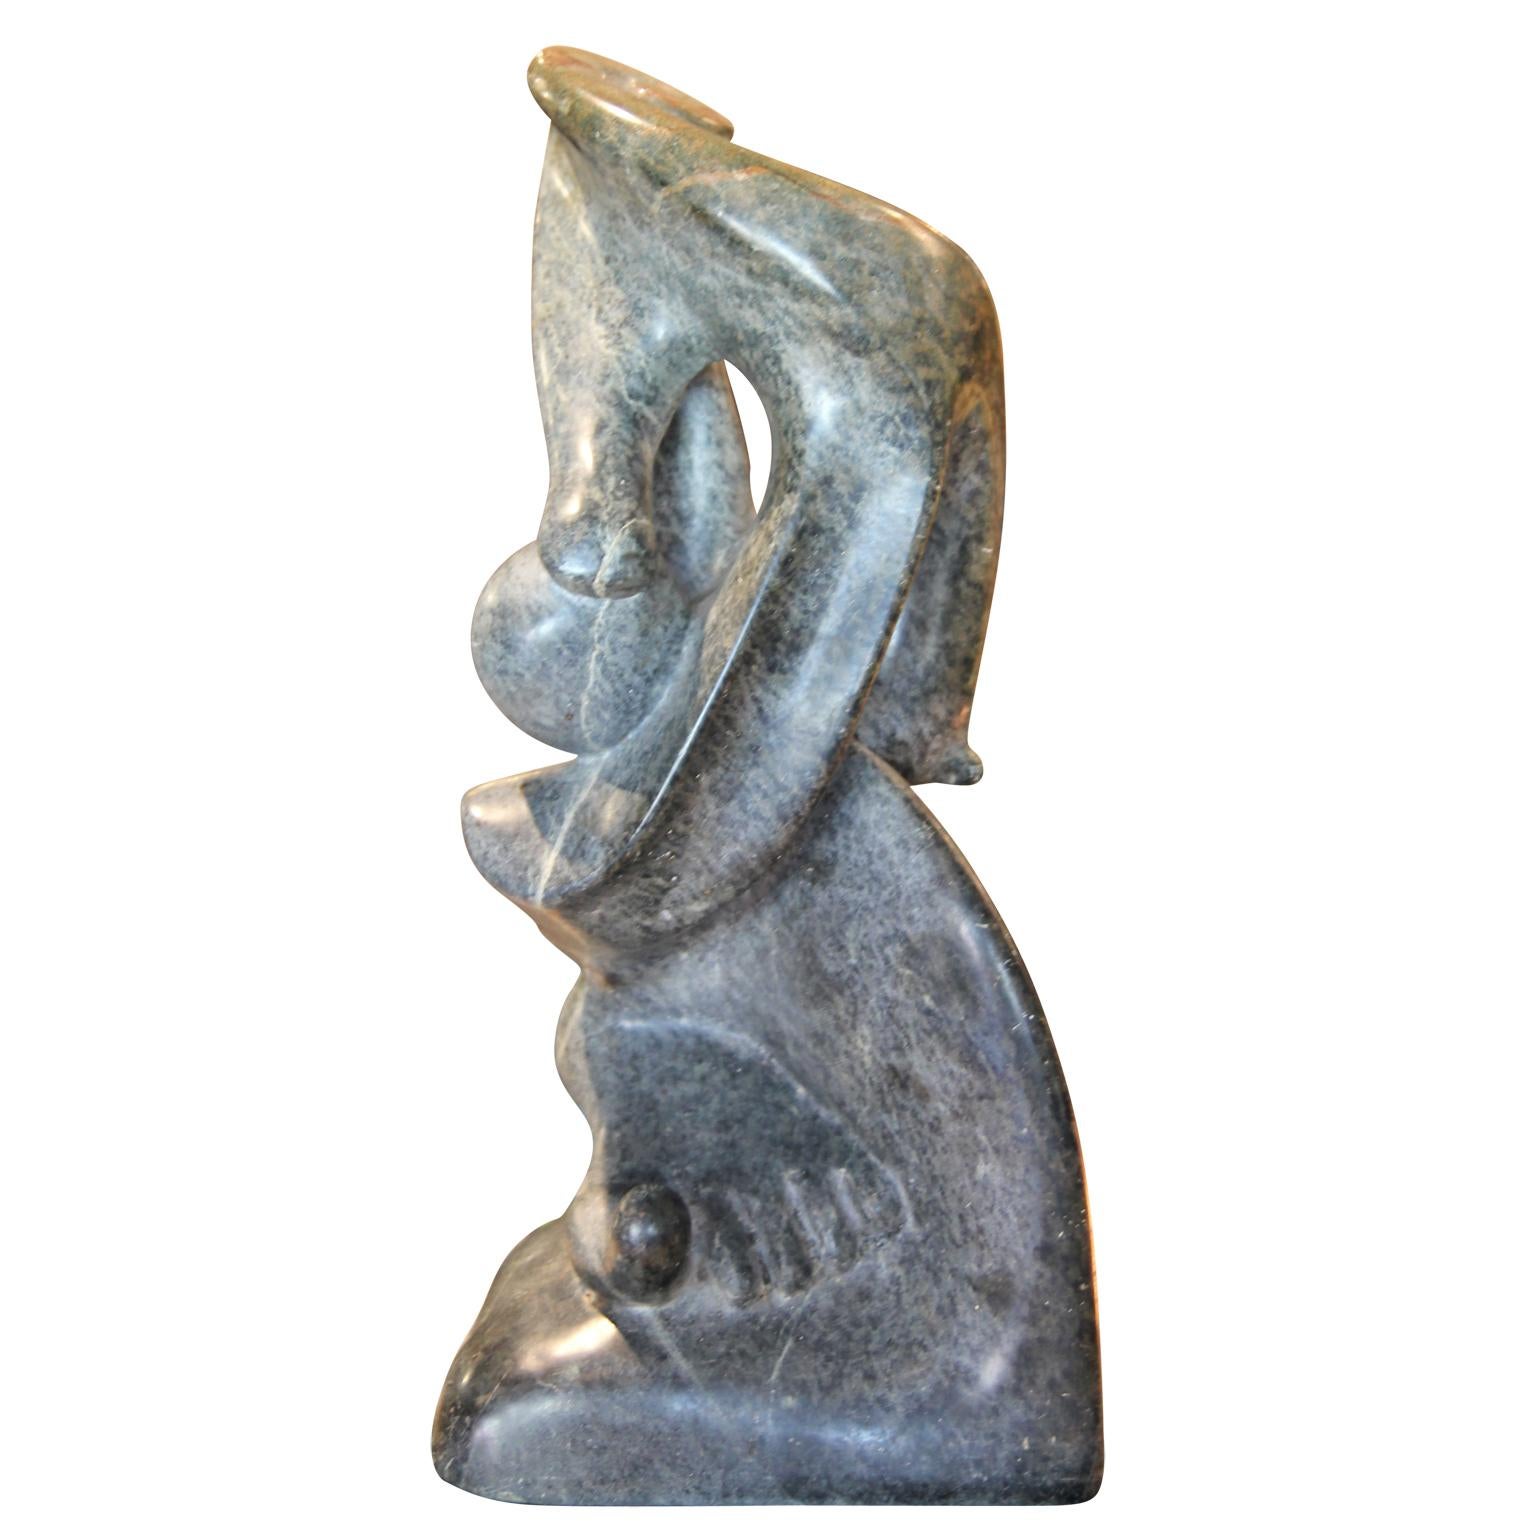 Unknown Figurative Sculpture - Abstract Figurative Marble Scuplture Signed Mario C: G: